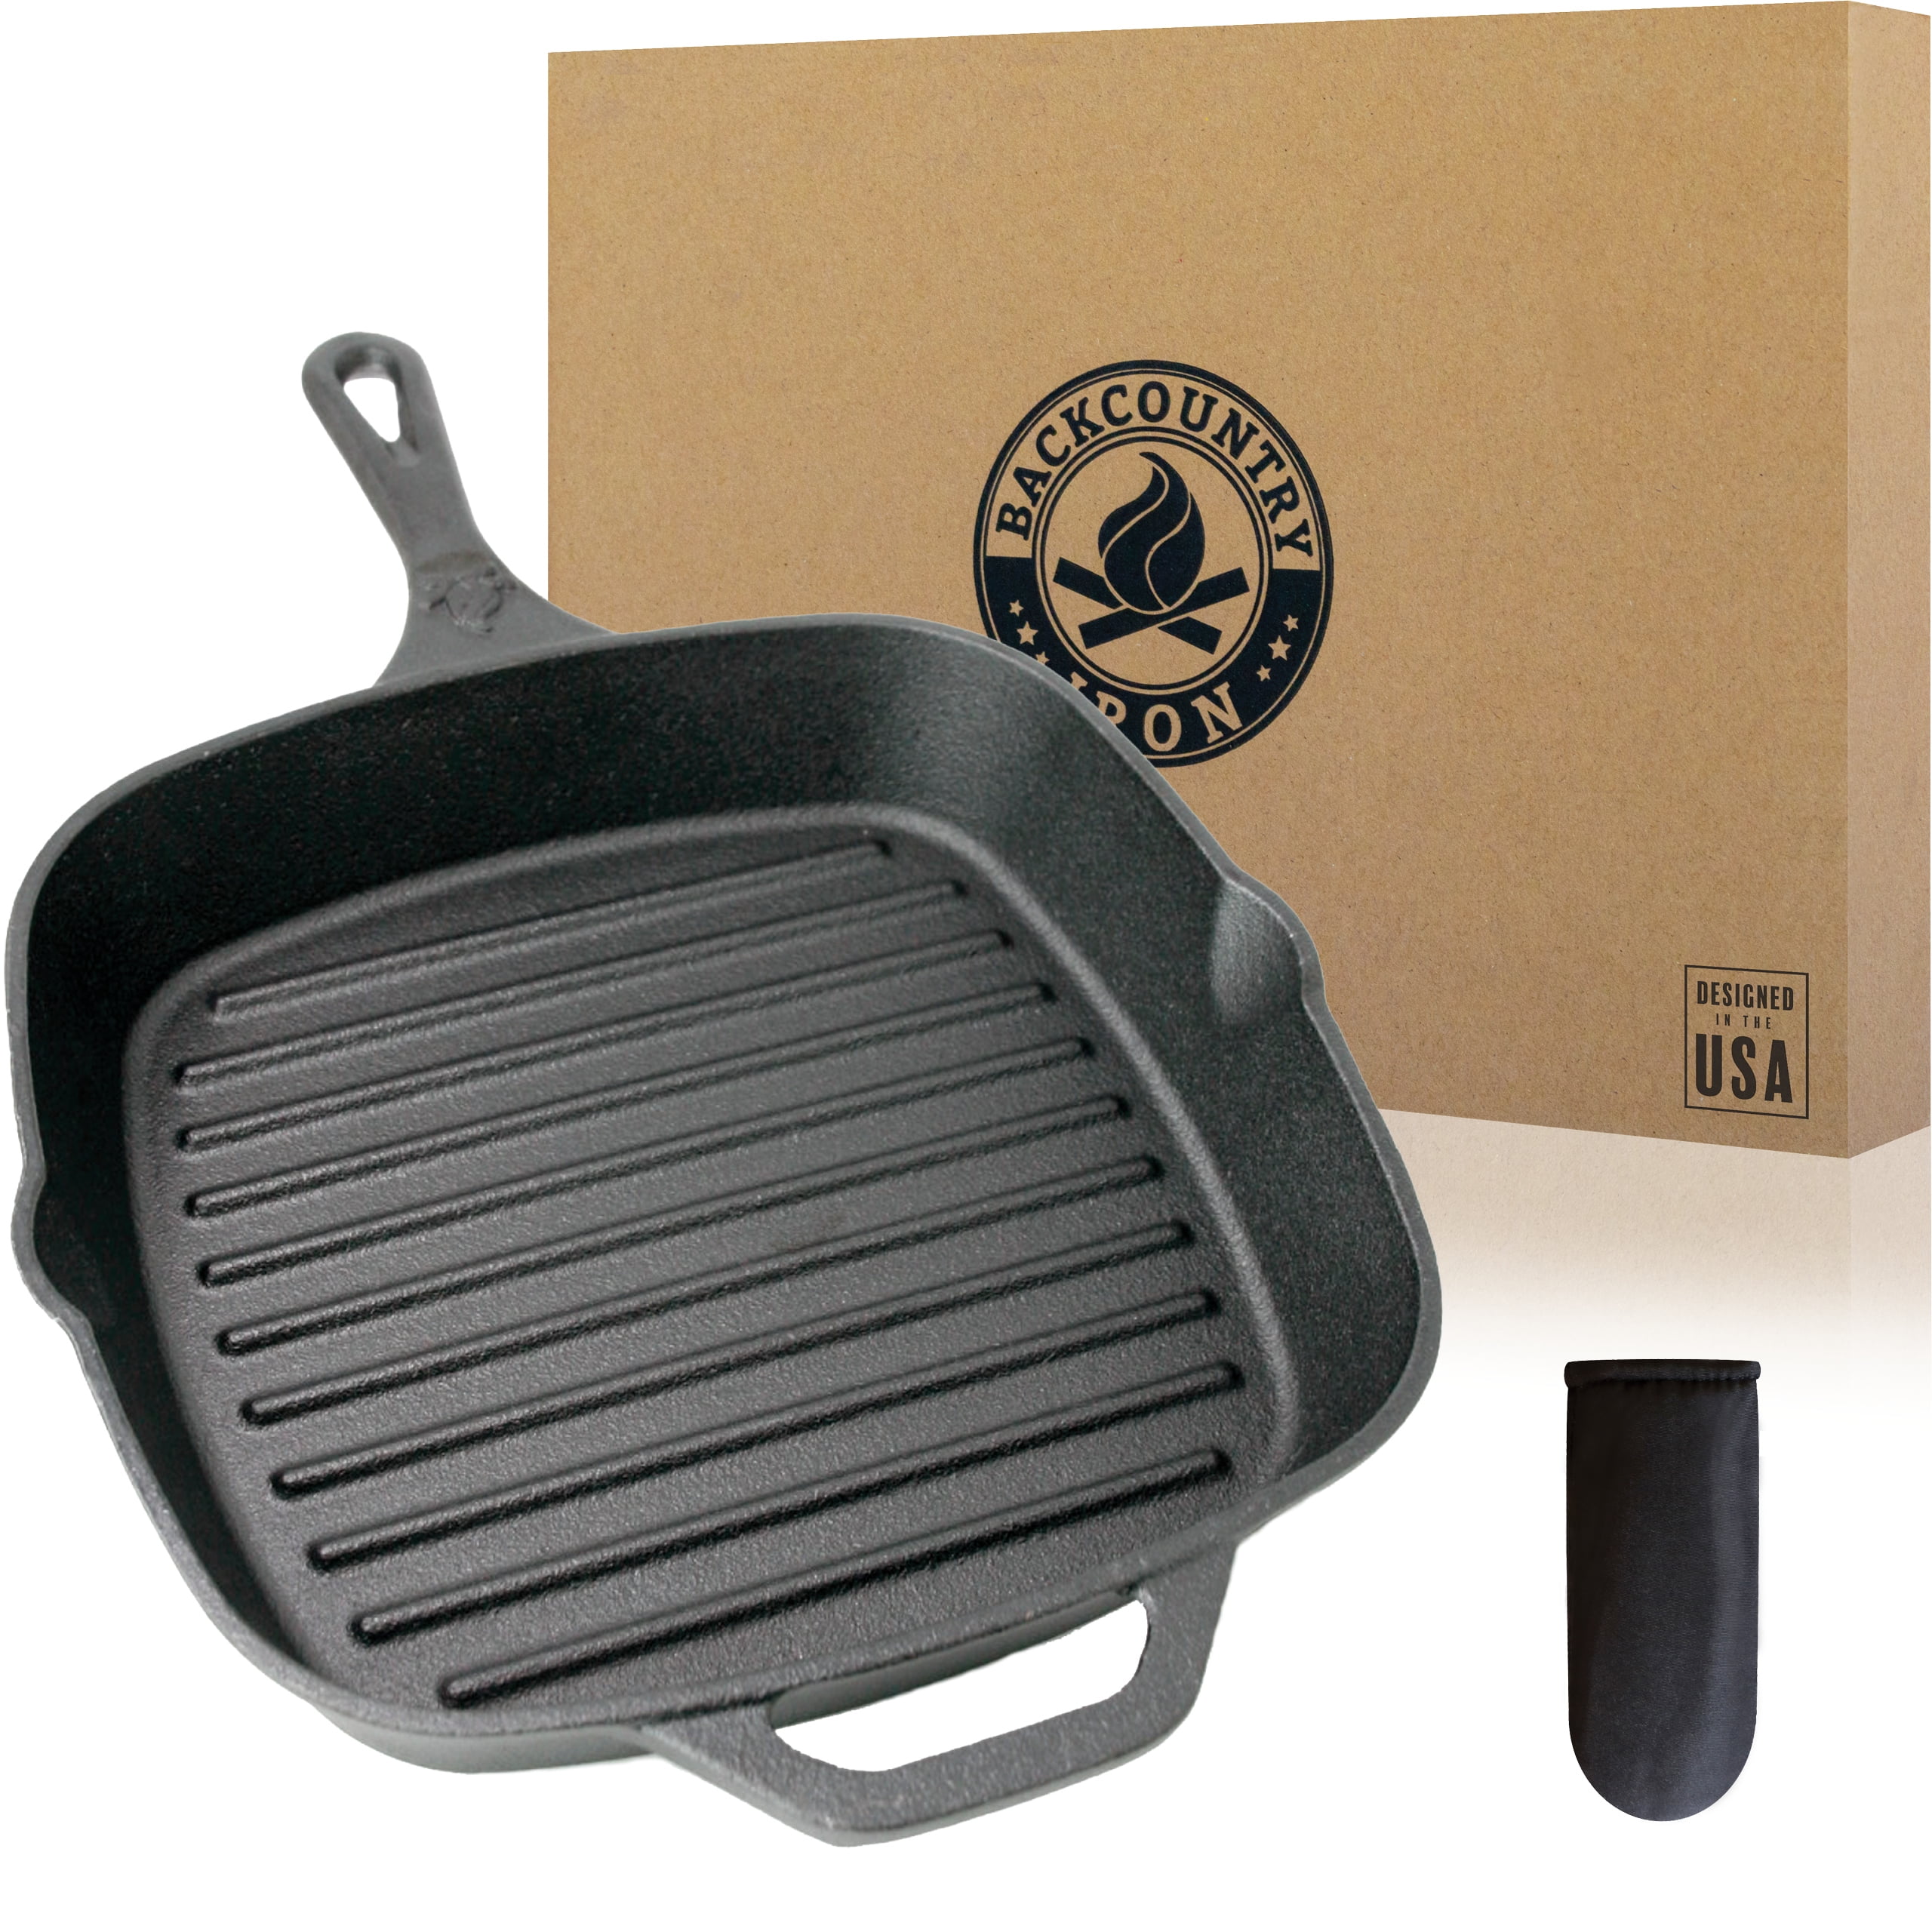 Cast Iron Grill Pan 12.6 inch Pre-Seasoned Cast Iron Griddle Pan